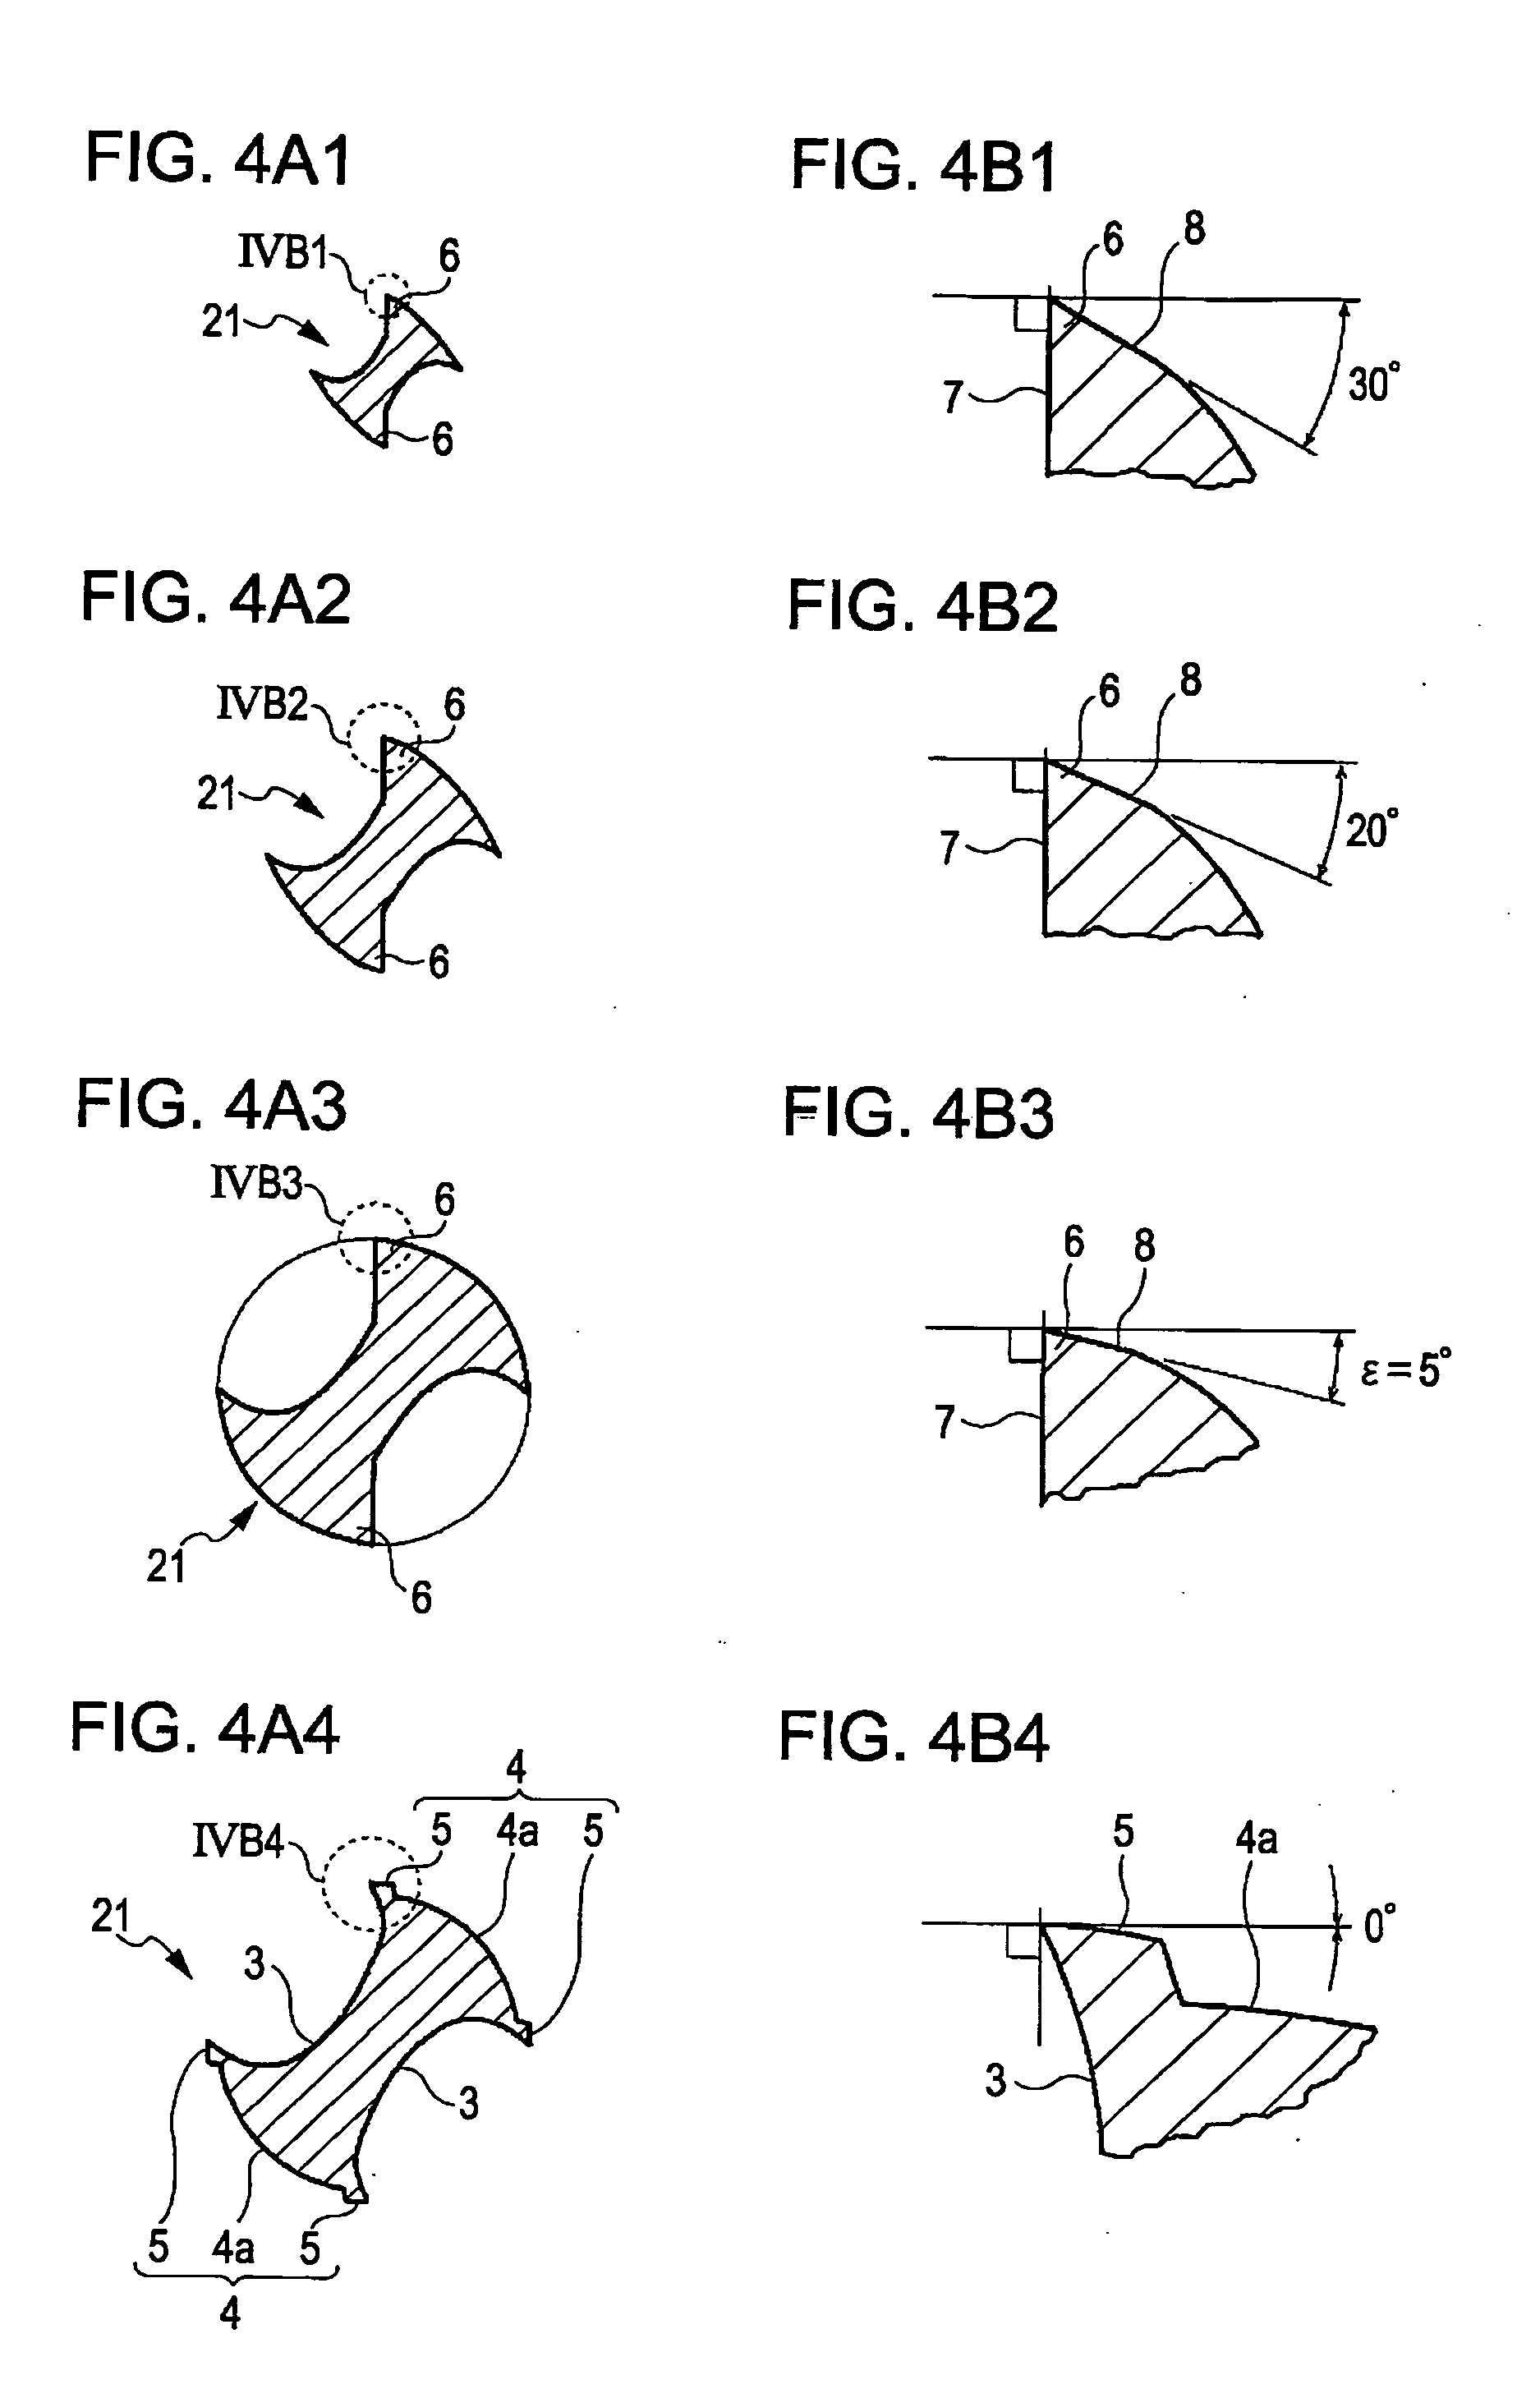 Drill and drilling method for workpiece